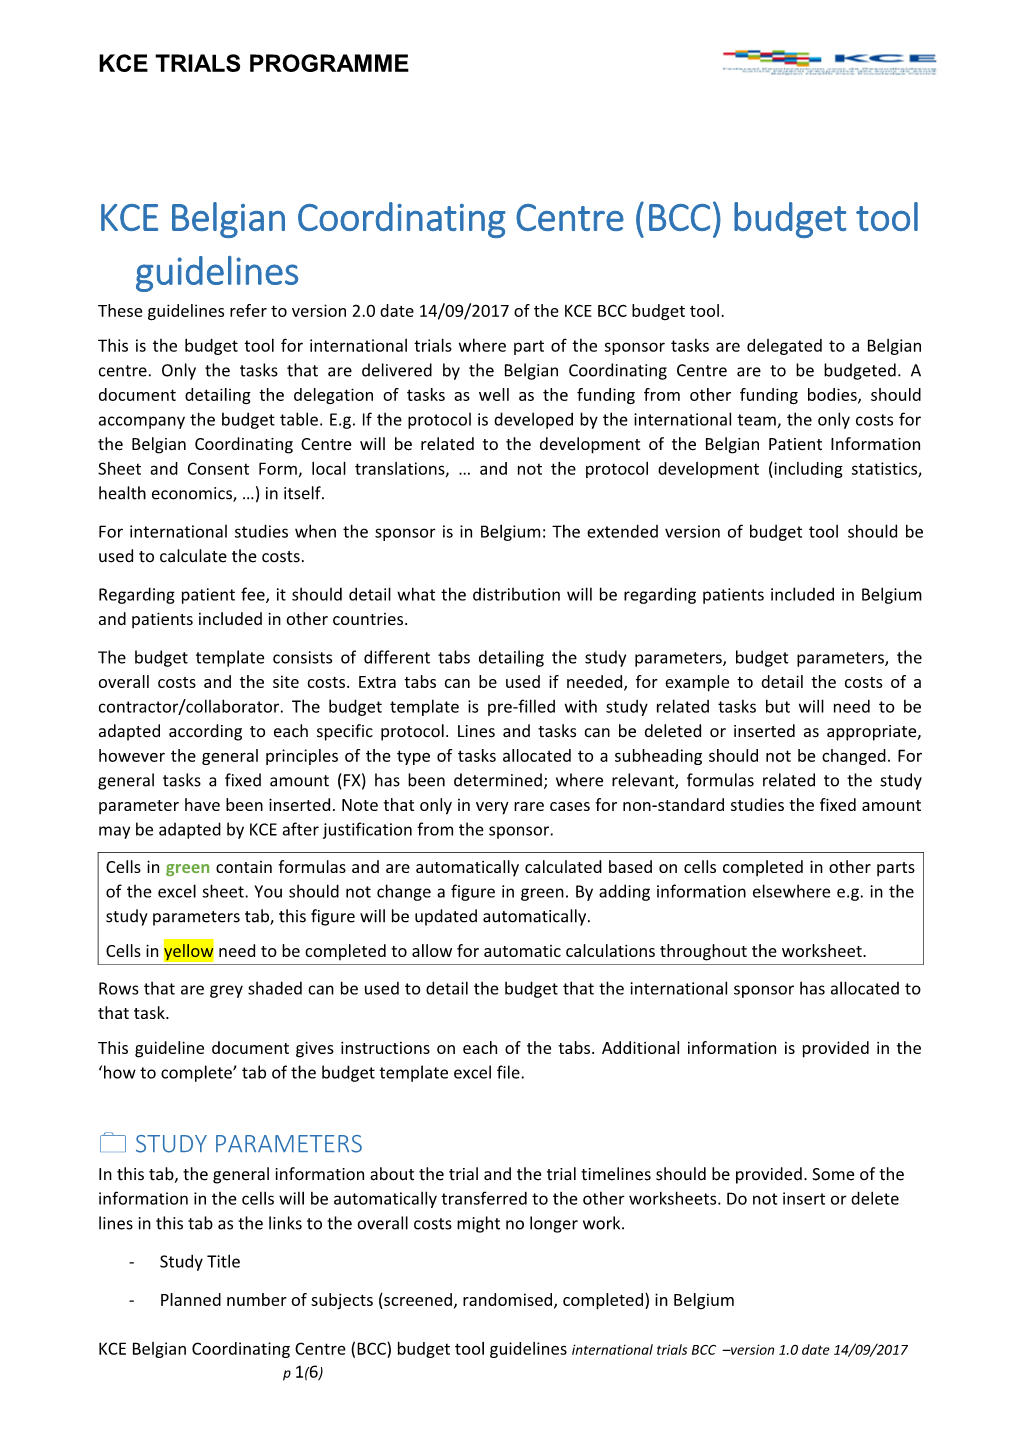 KCE Belgian Coordinating Centre (BCC) Budget Tool Guidelines